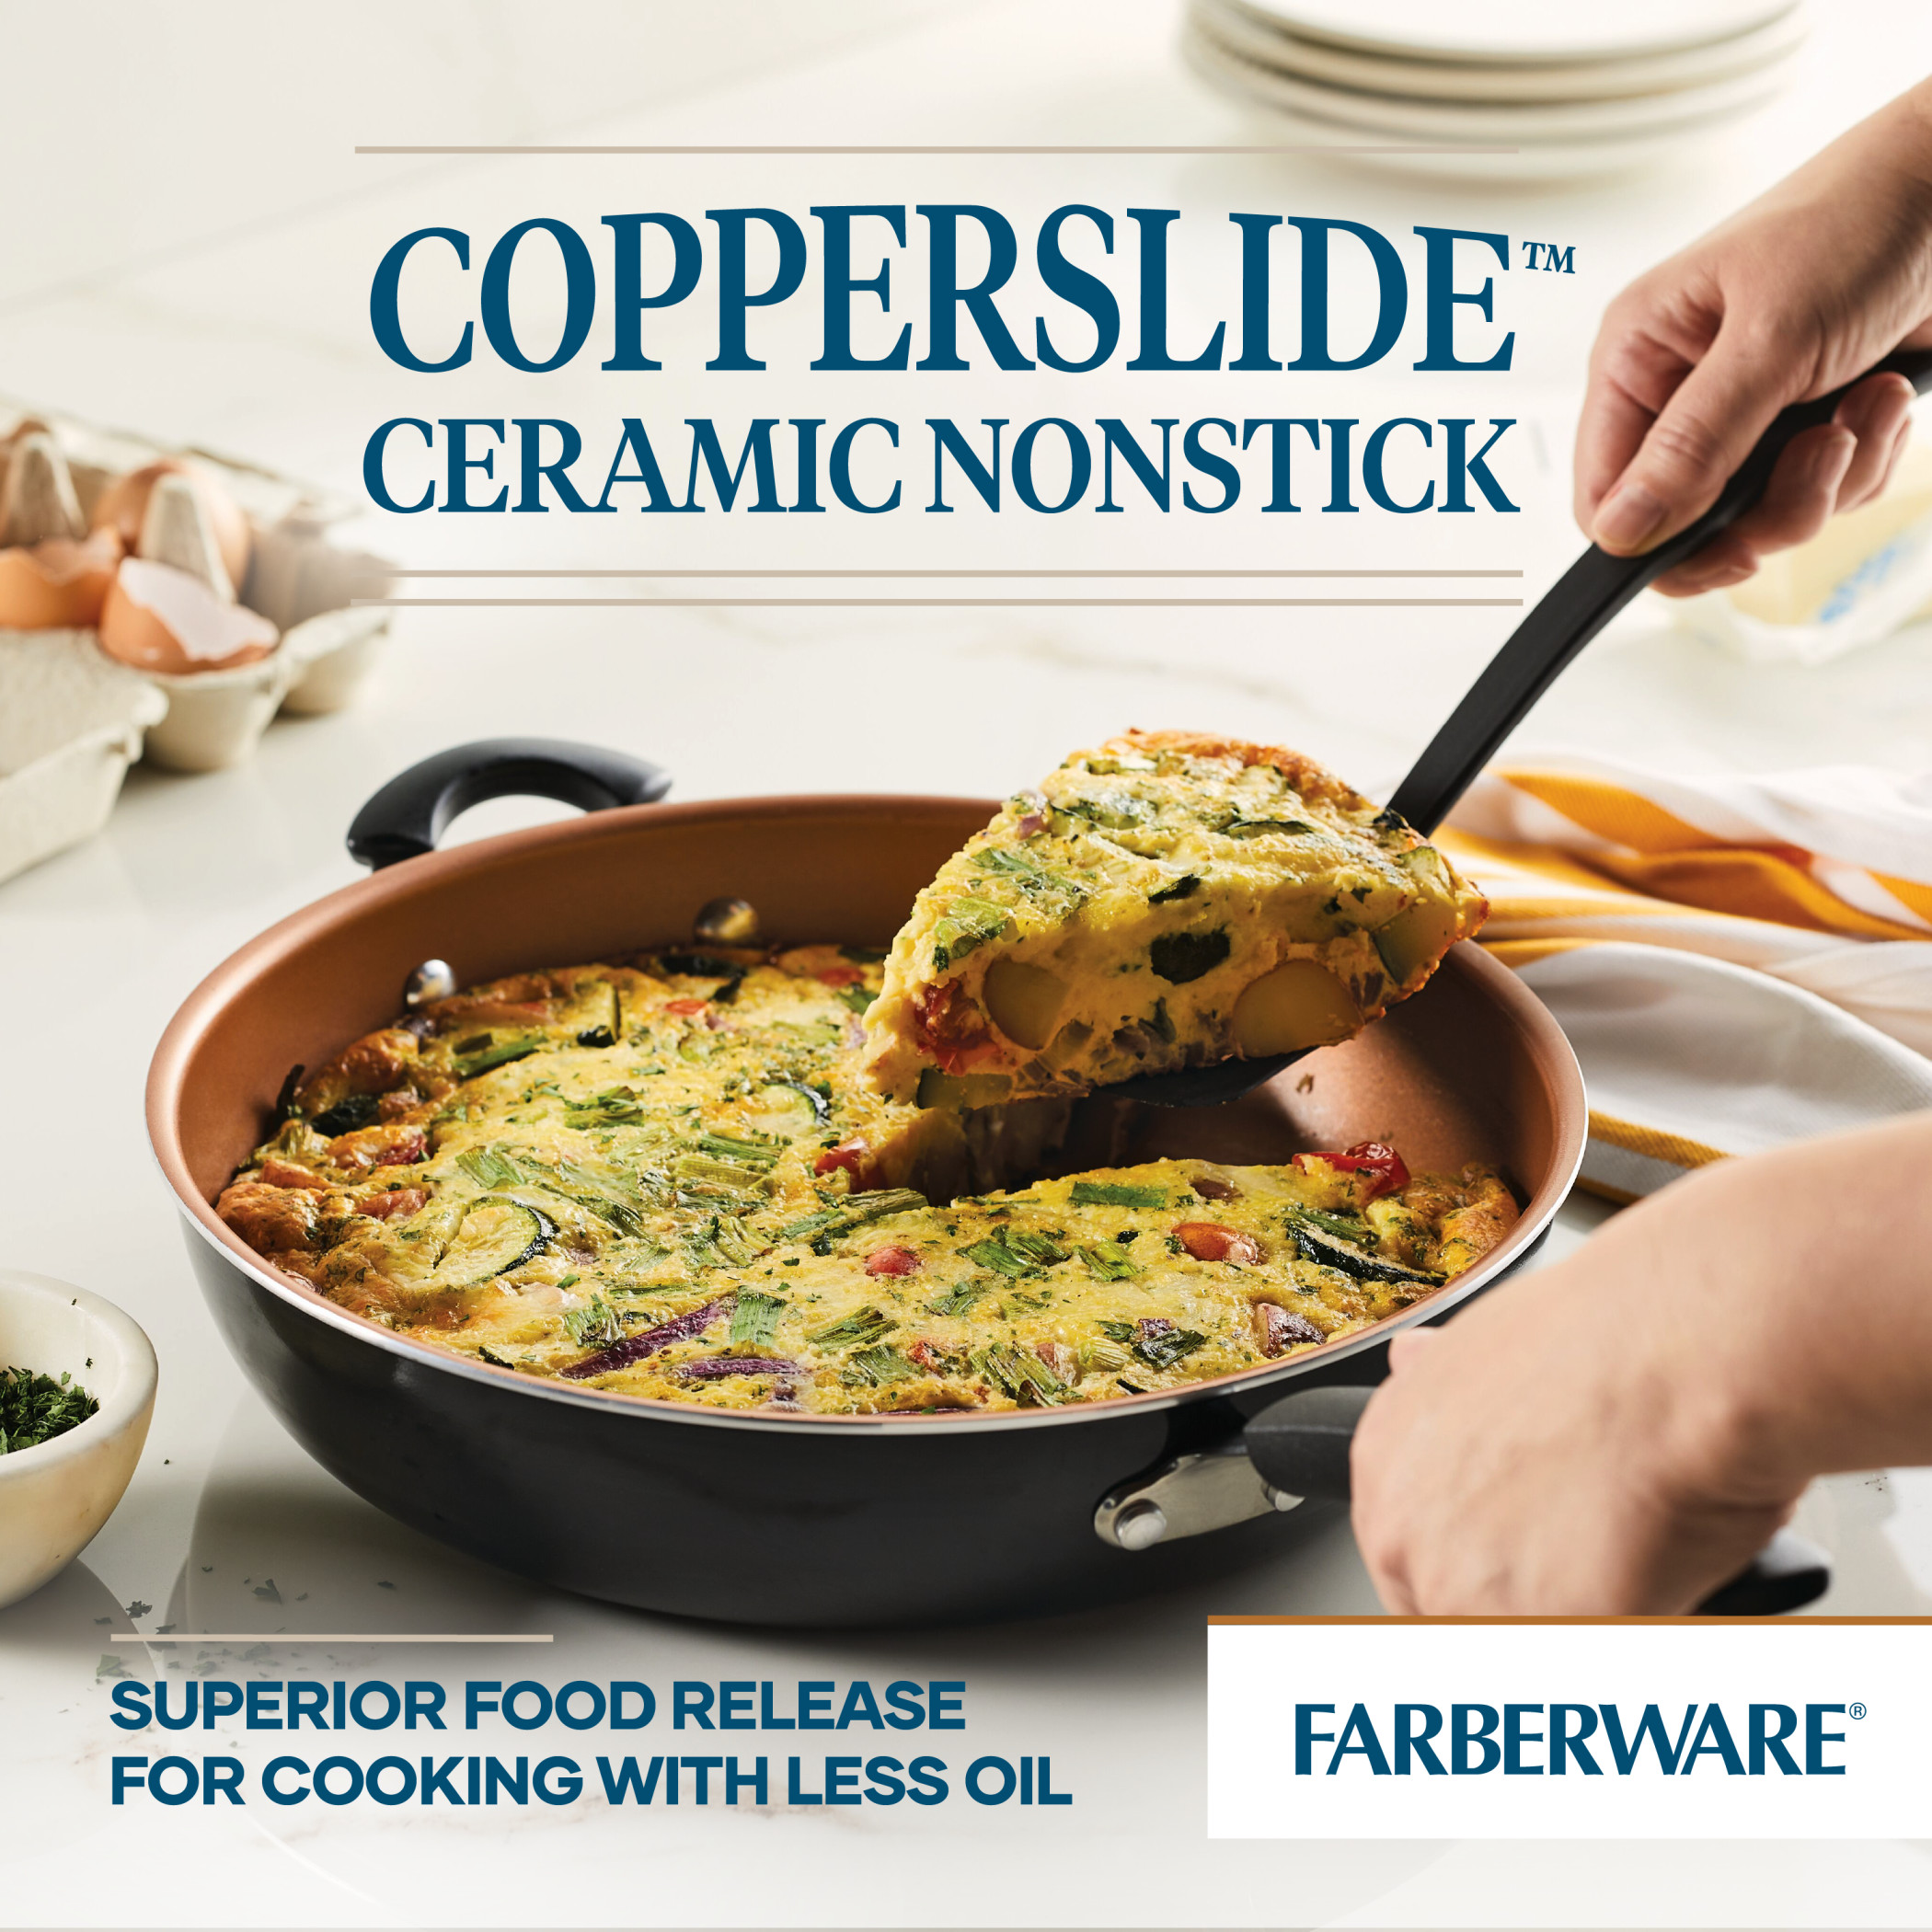 Farberware 12.5" Easy Clean Pro Non-Stick Skillet with Helper Handle, Black - image 5 of 14